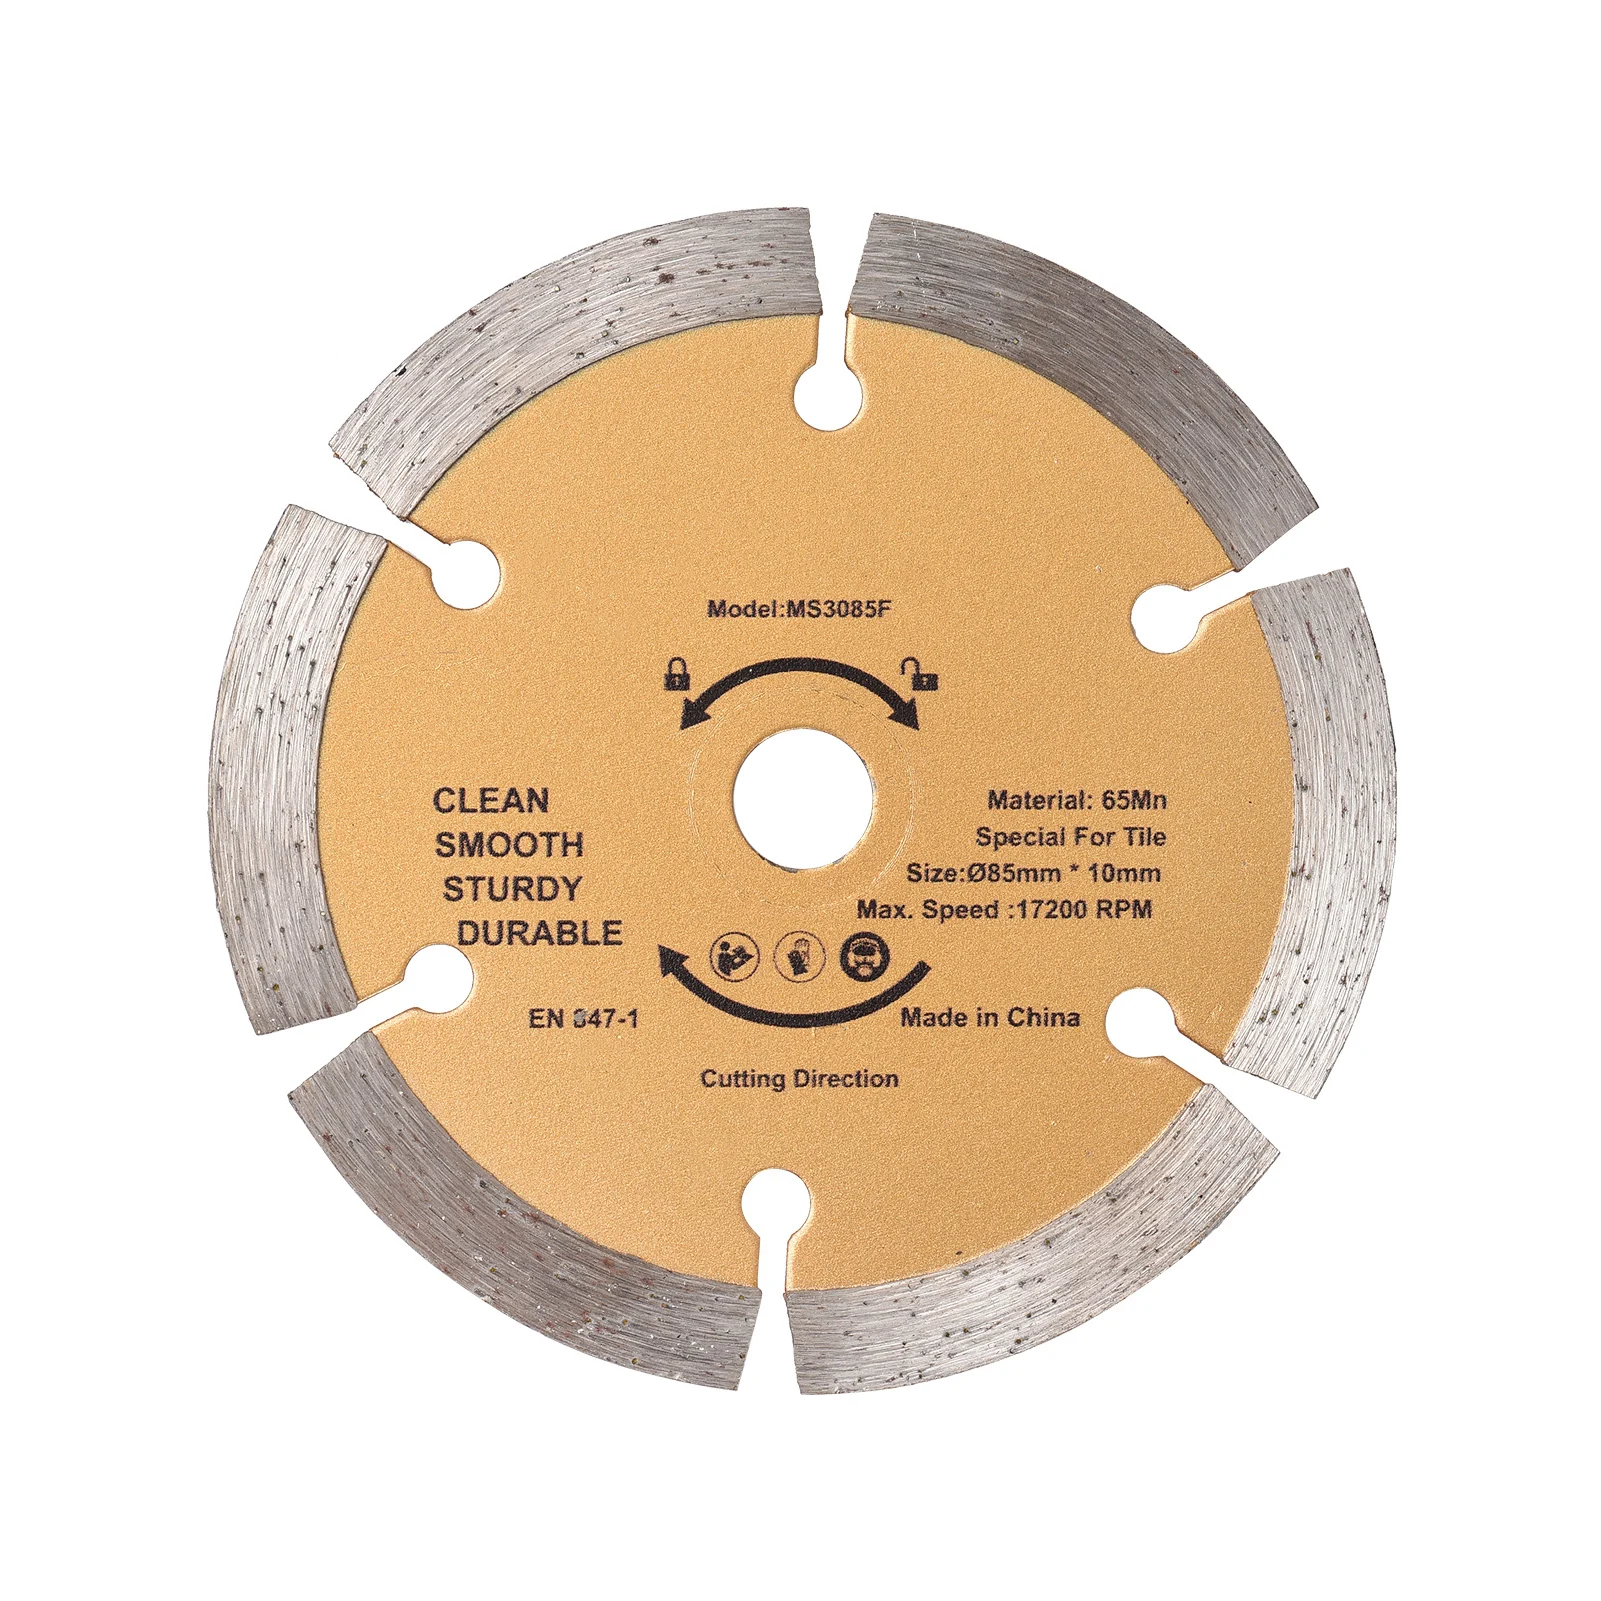 

Mini Diamond Cutting Blade Ceramic Tile Saw Blade with Continuous Rim Circular Saw Cutter Angle Grinder Disc for Tile Masonry